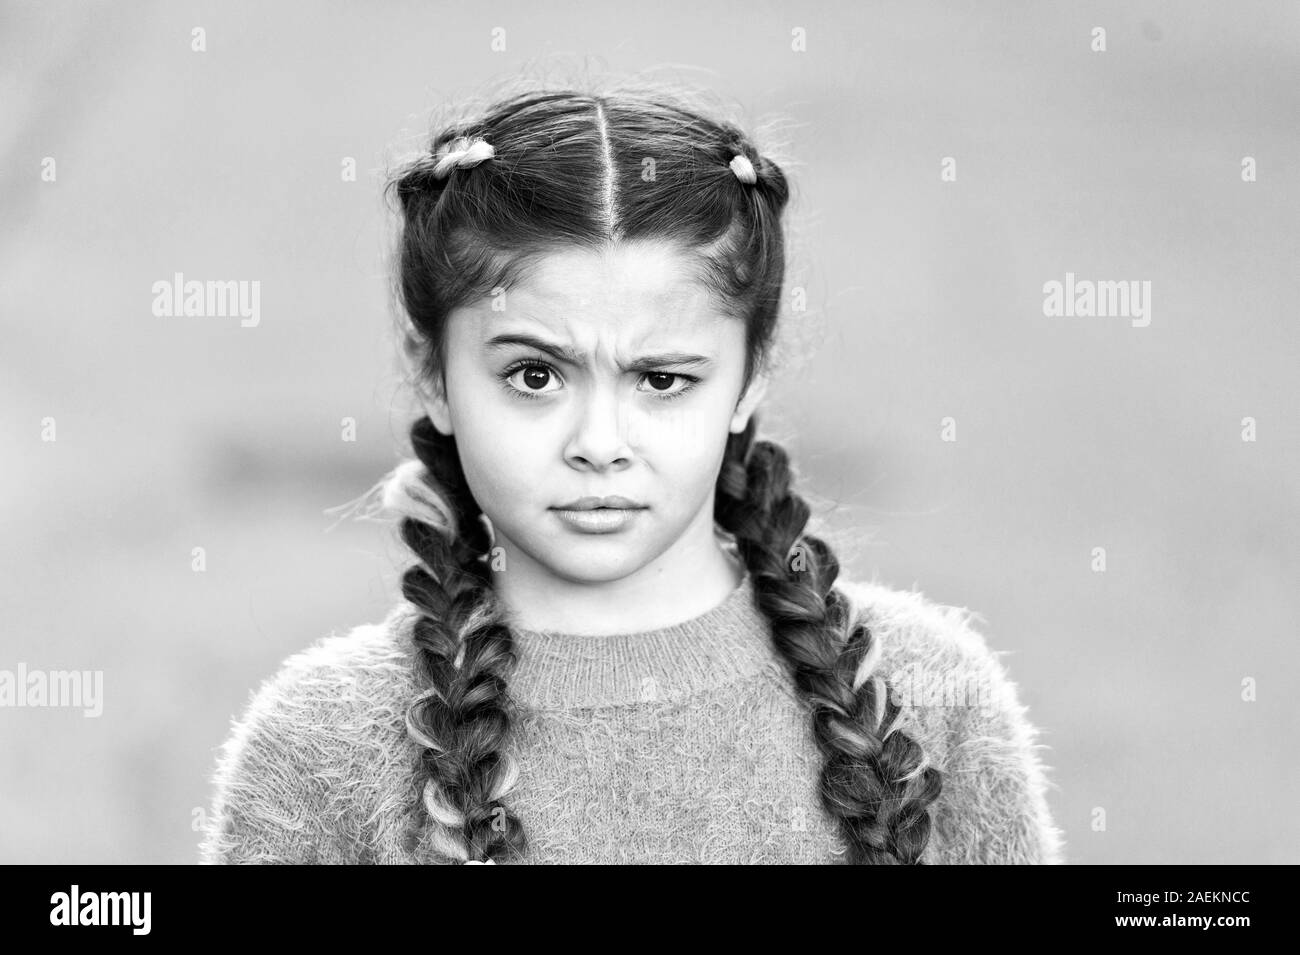 Suspicious look. Kanekalon strand in braids of child. Braided hairstyle  concept. Girl with braided hair style pink kanekalon. Hairdresser salon.  Braided cutie. Little girl with cute braids close up Stock Photo -